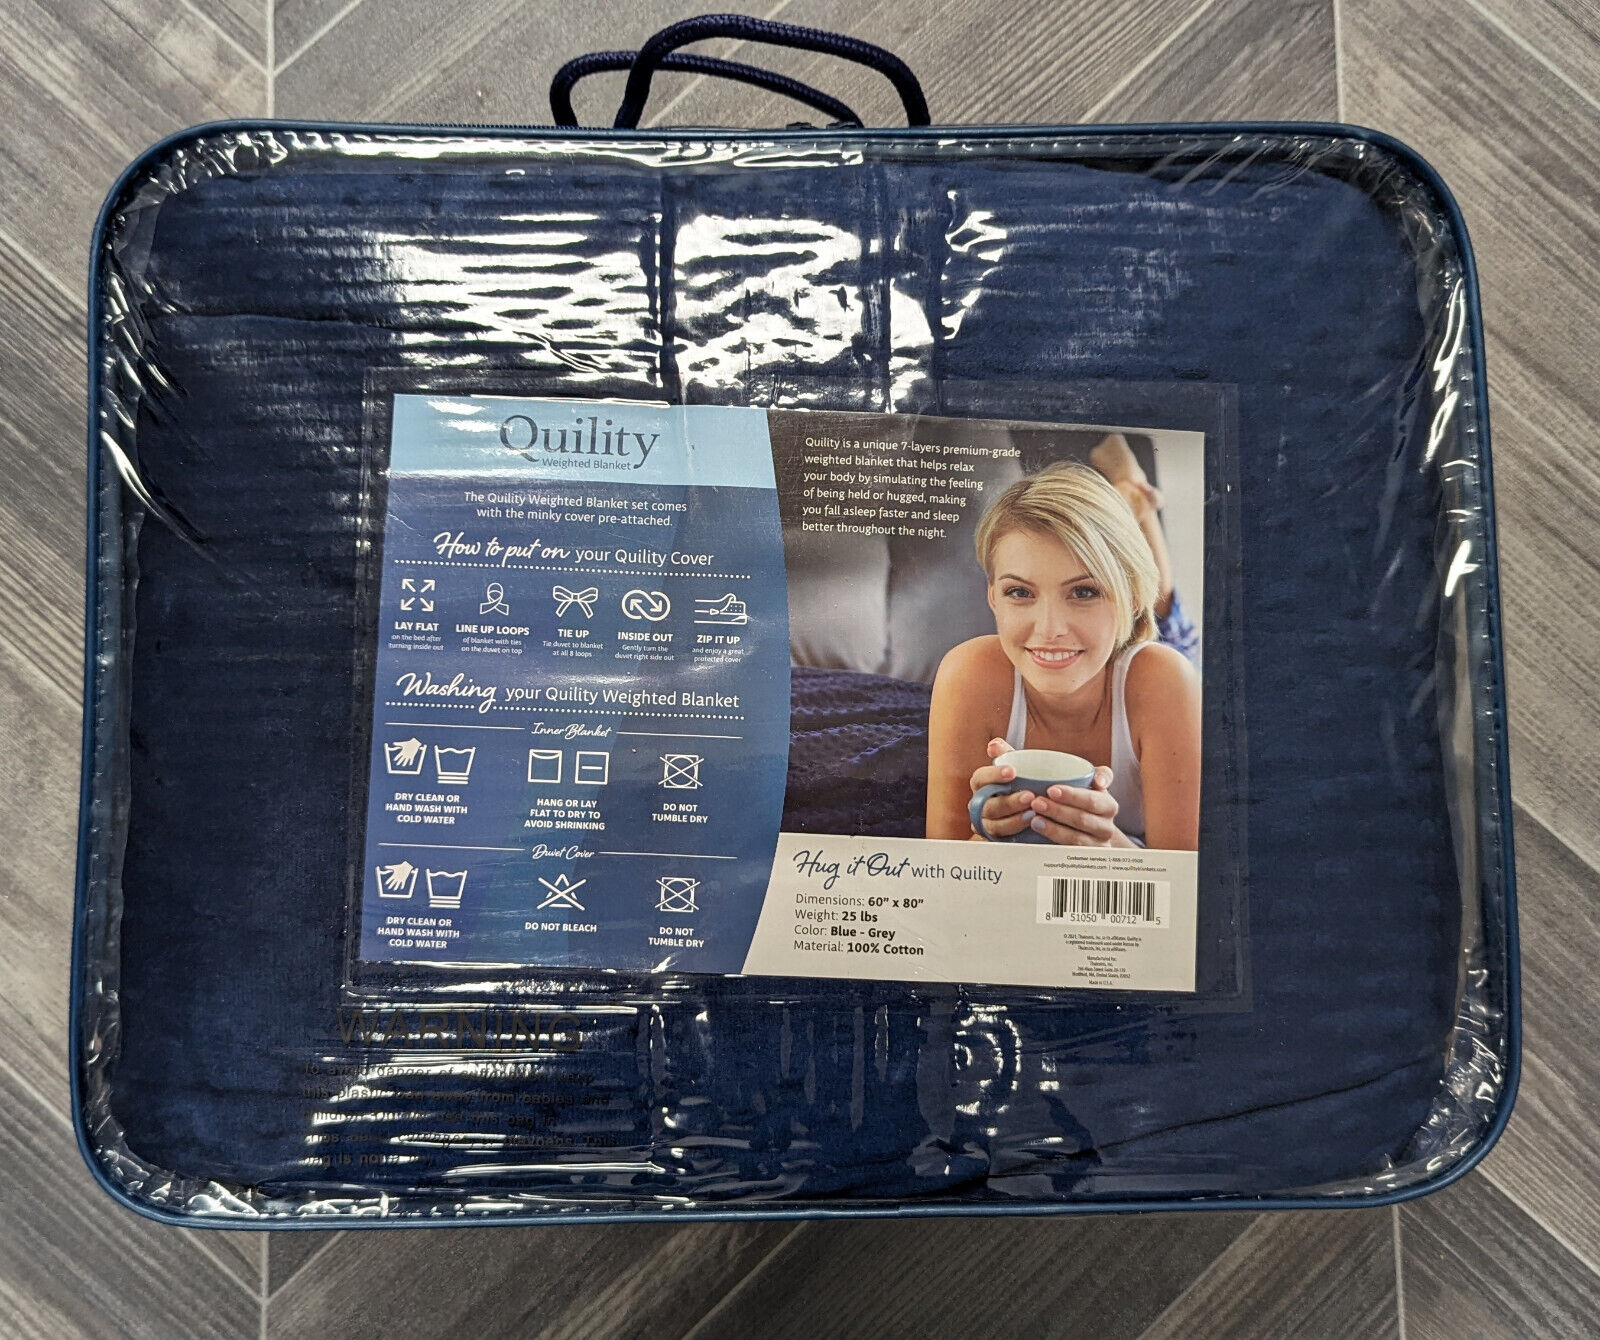 Quility 25 Lbs Weighted Blanket, Color Blue